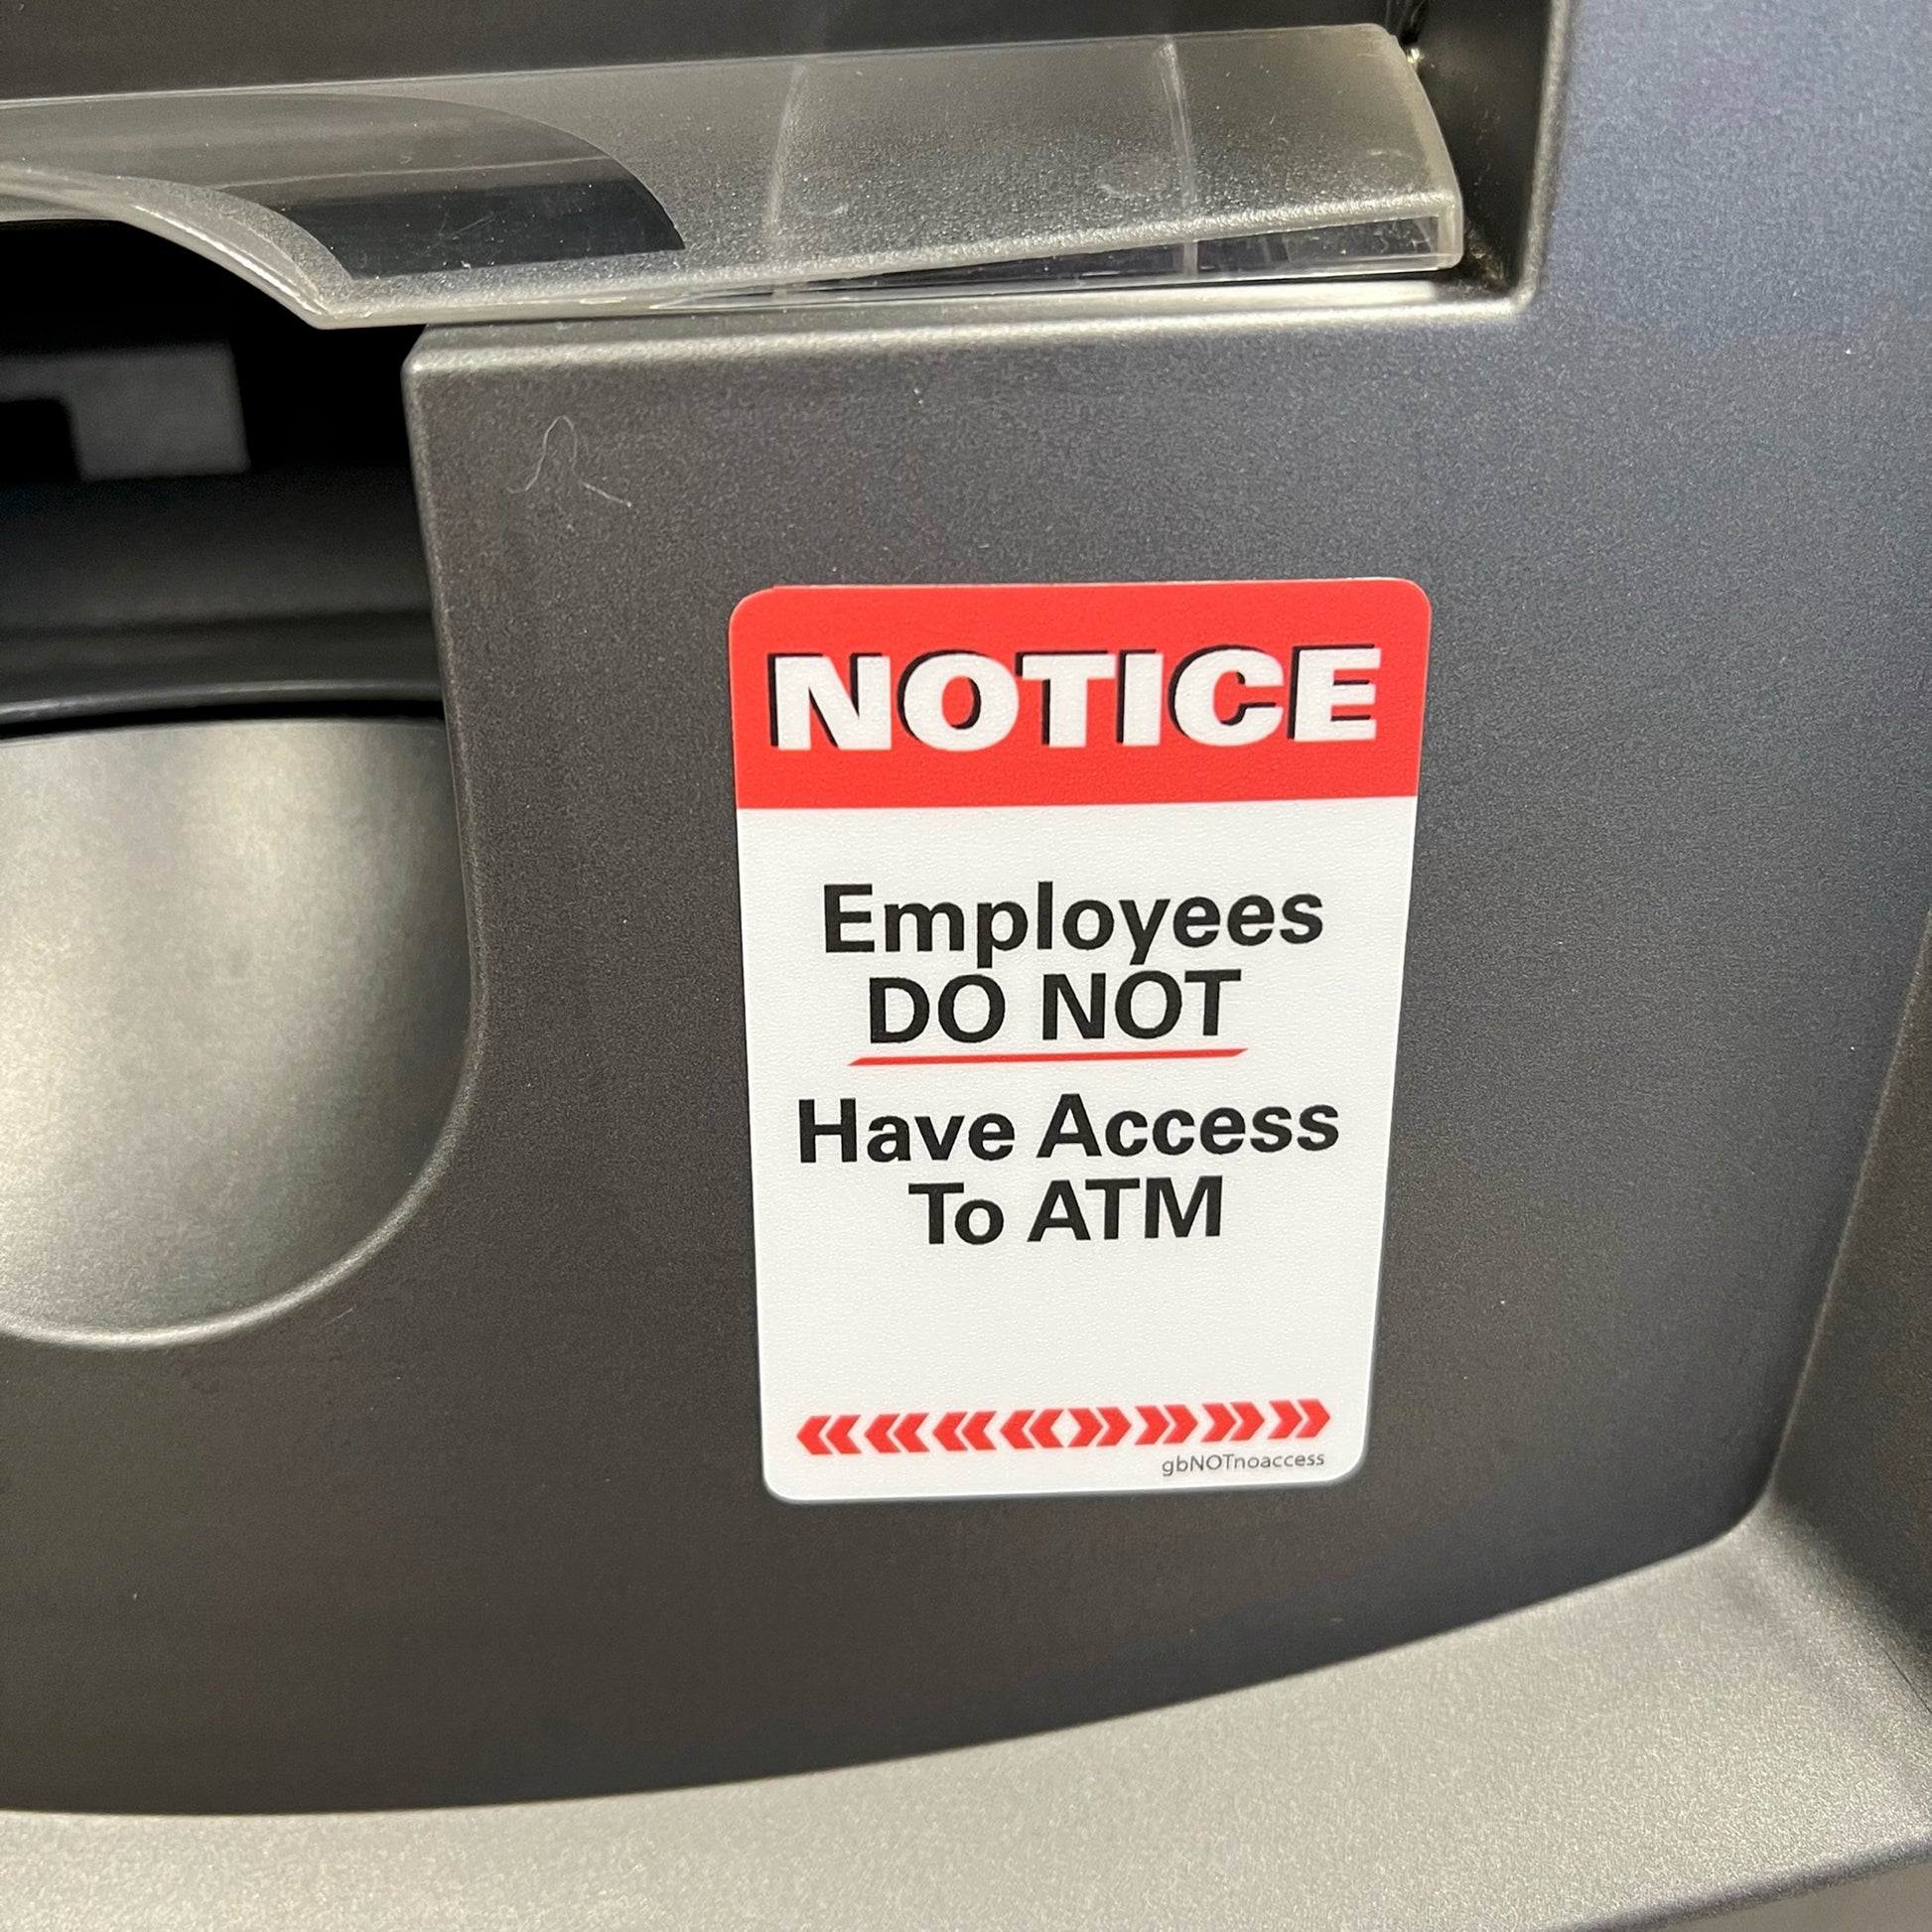 Employees Do Not Have Access to ATM Decal Photo.